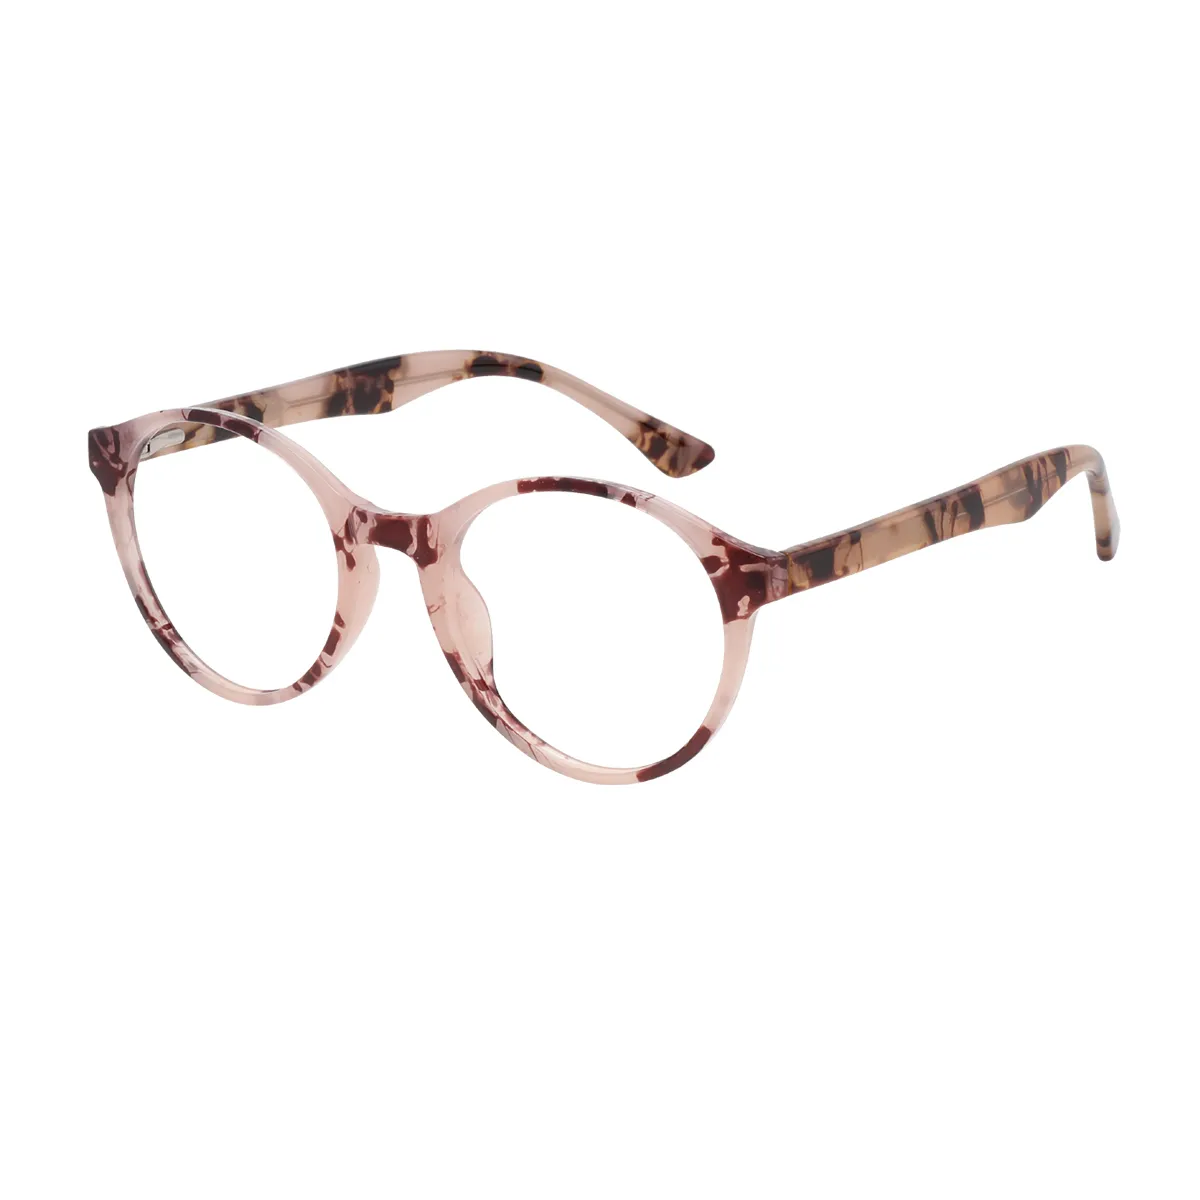 Amity - Round  Glasses for Women